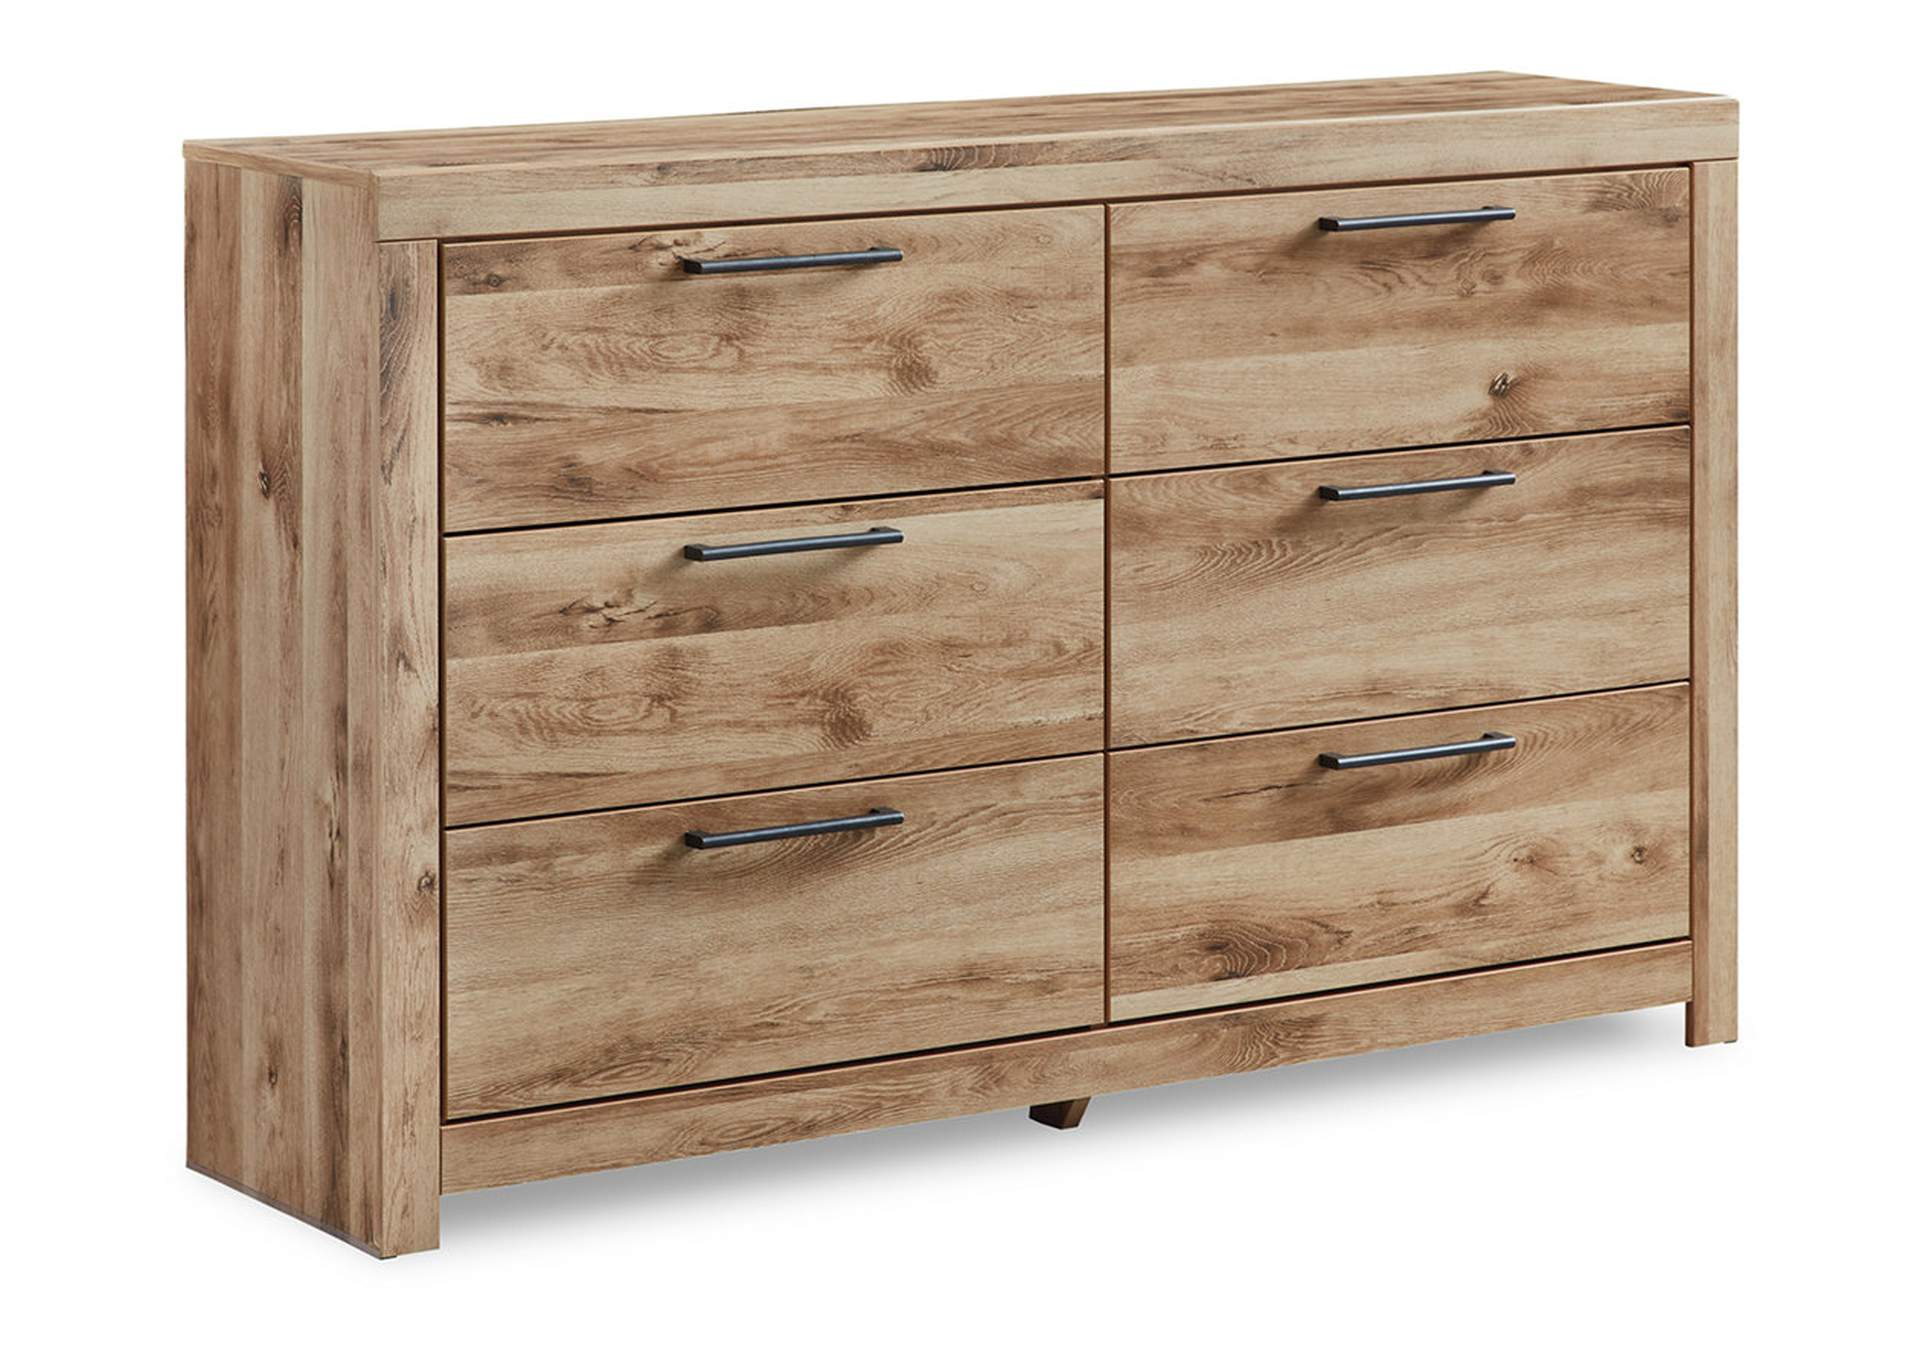 Hyanna Full Panel Bed with 2 Side Storage, Dresser and Mirror,Signature Design By Ashley